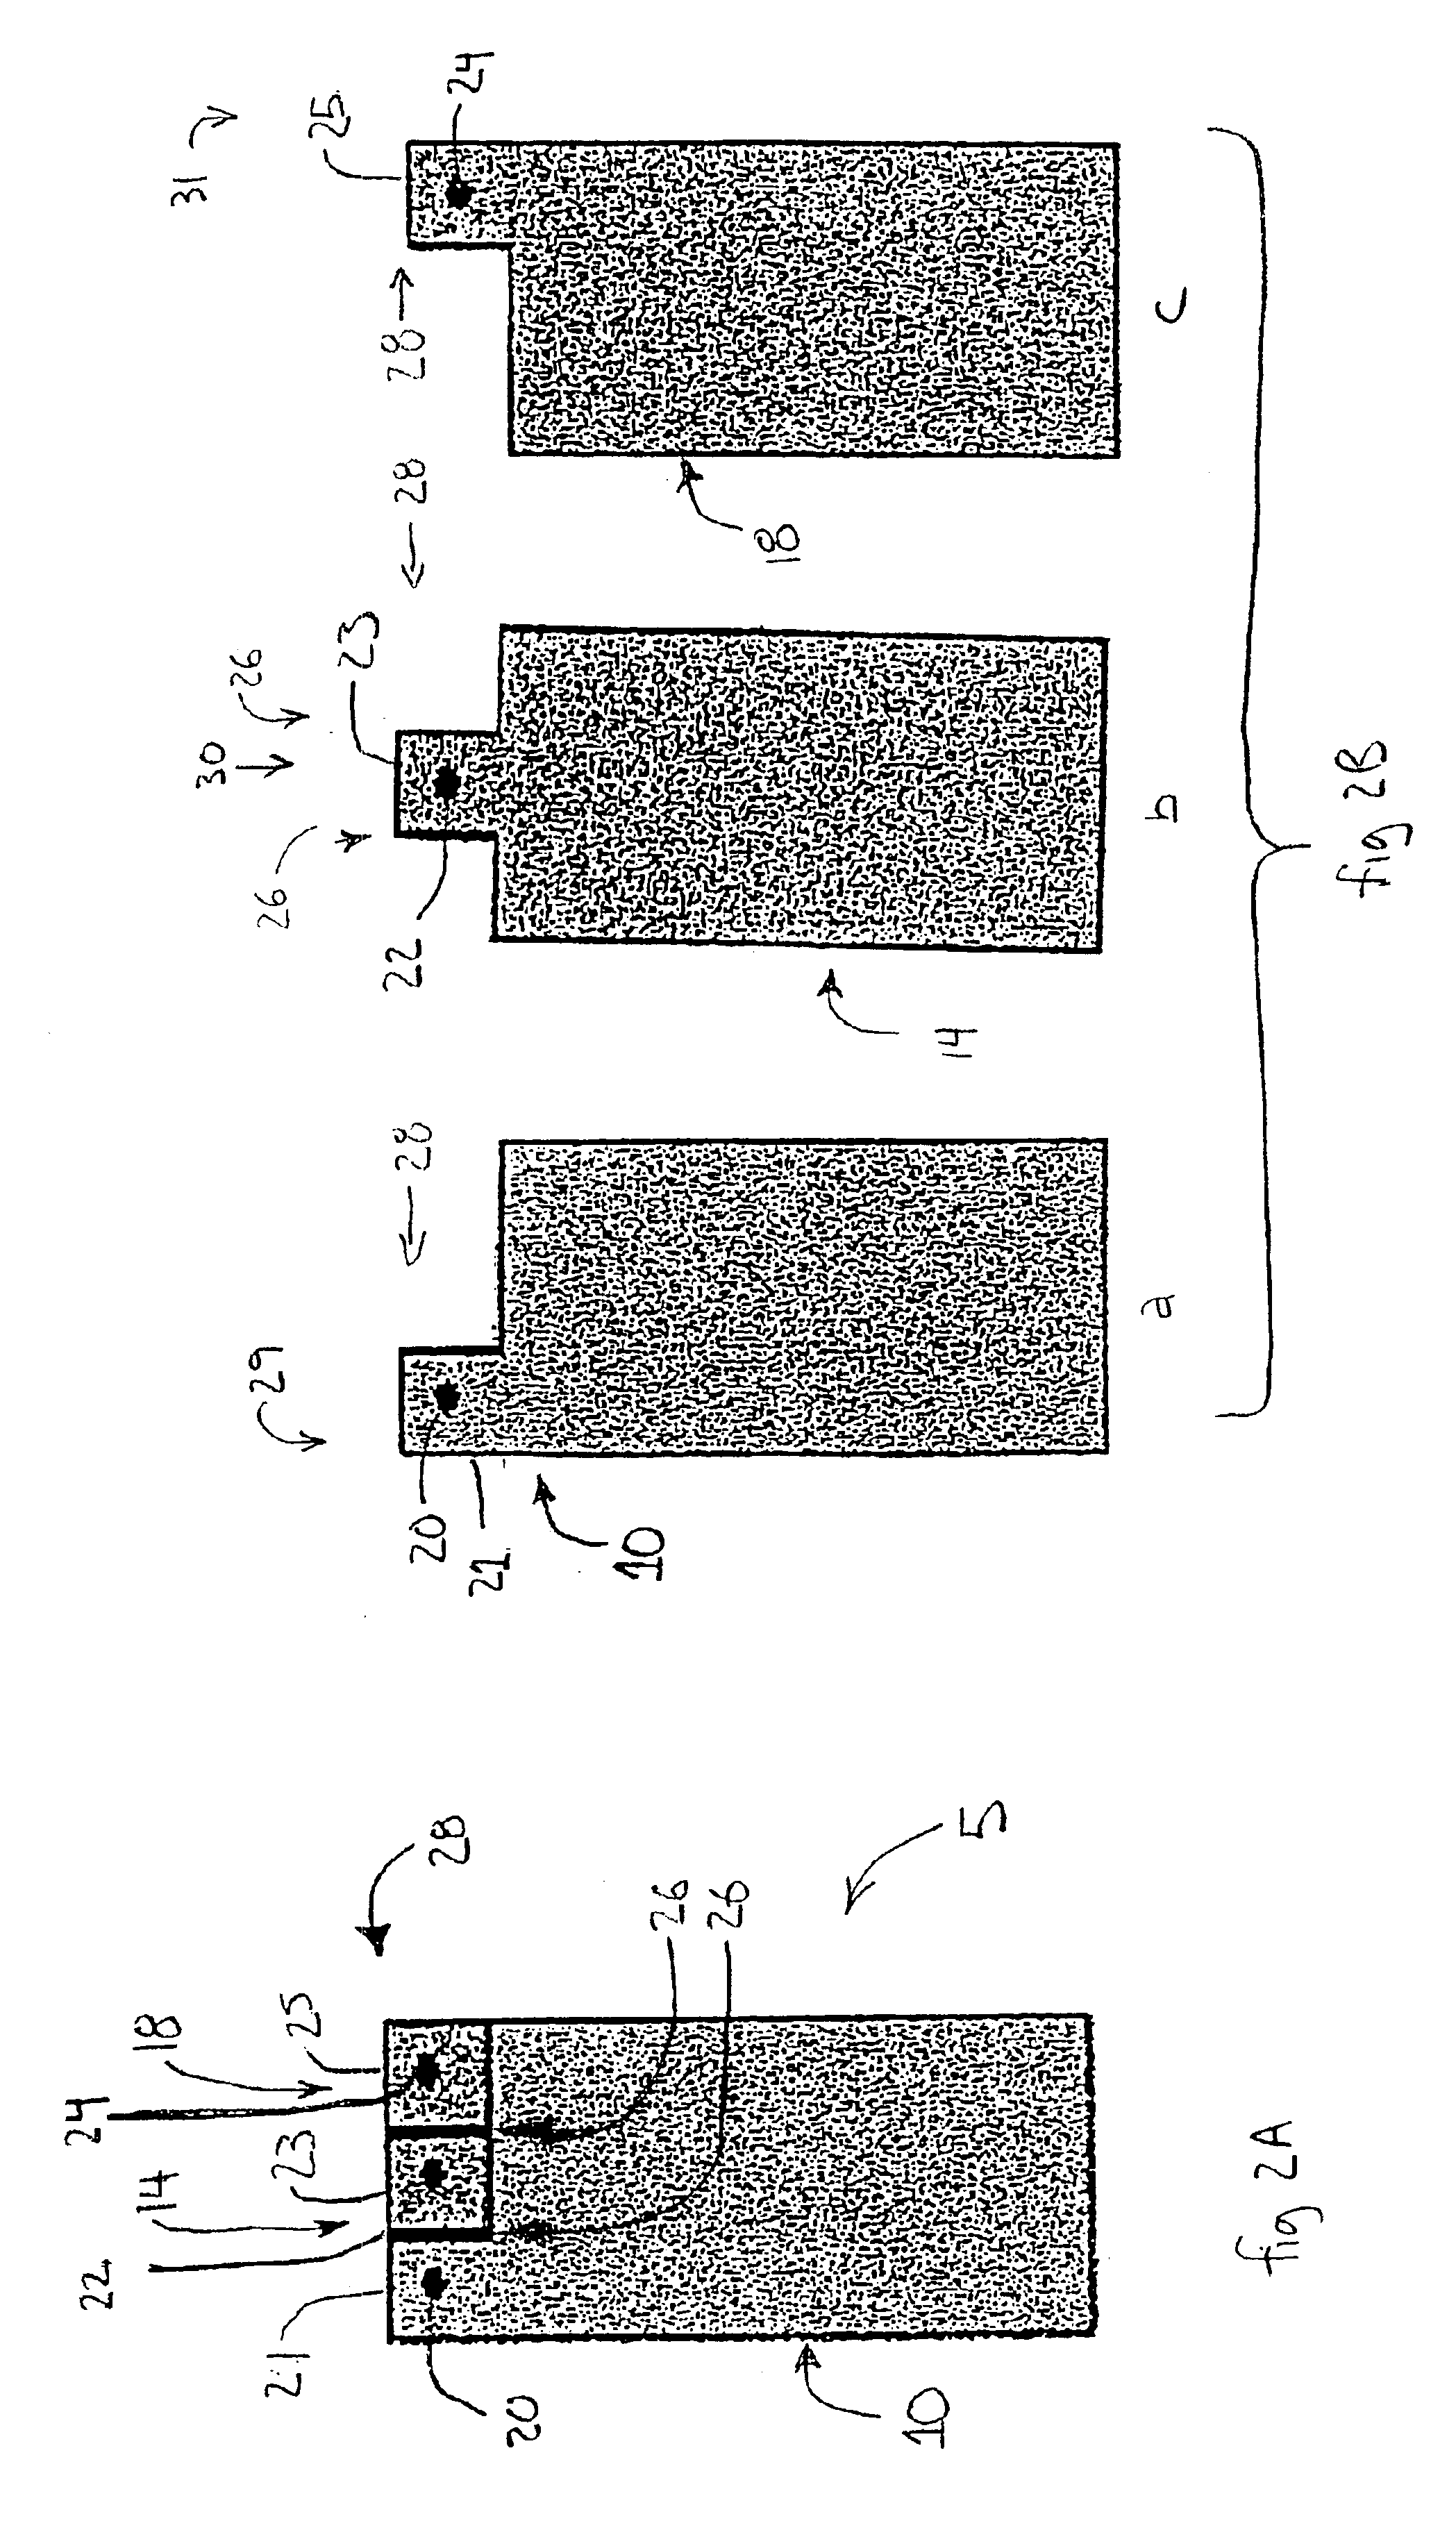 Electrical system for electrostrictive bimorph actuator